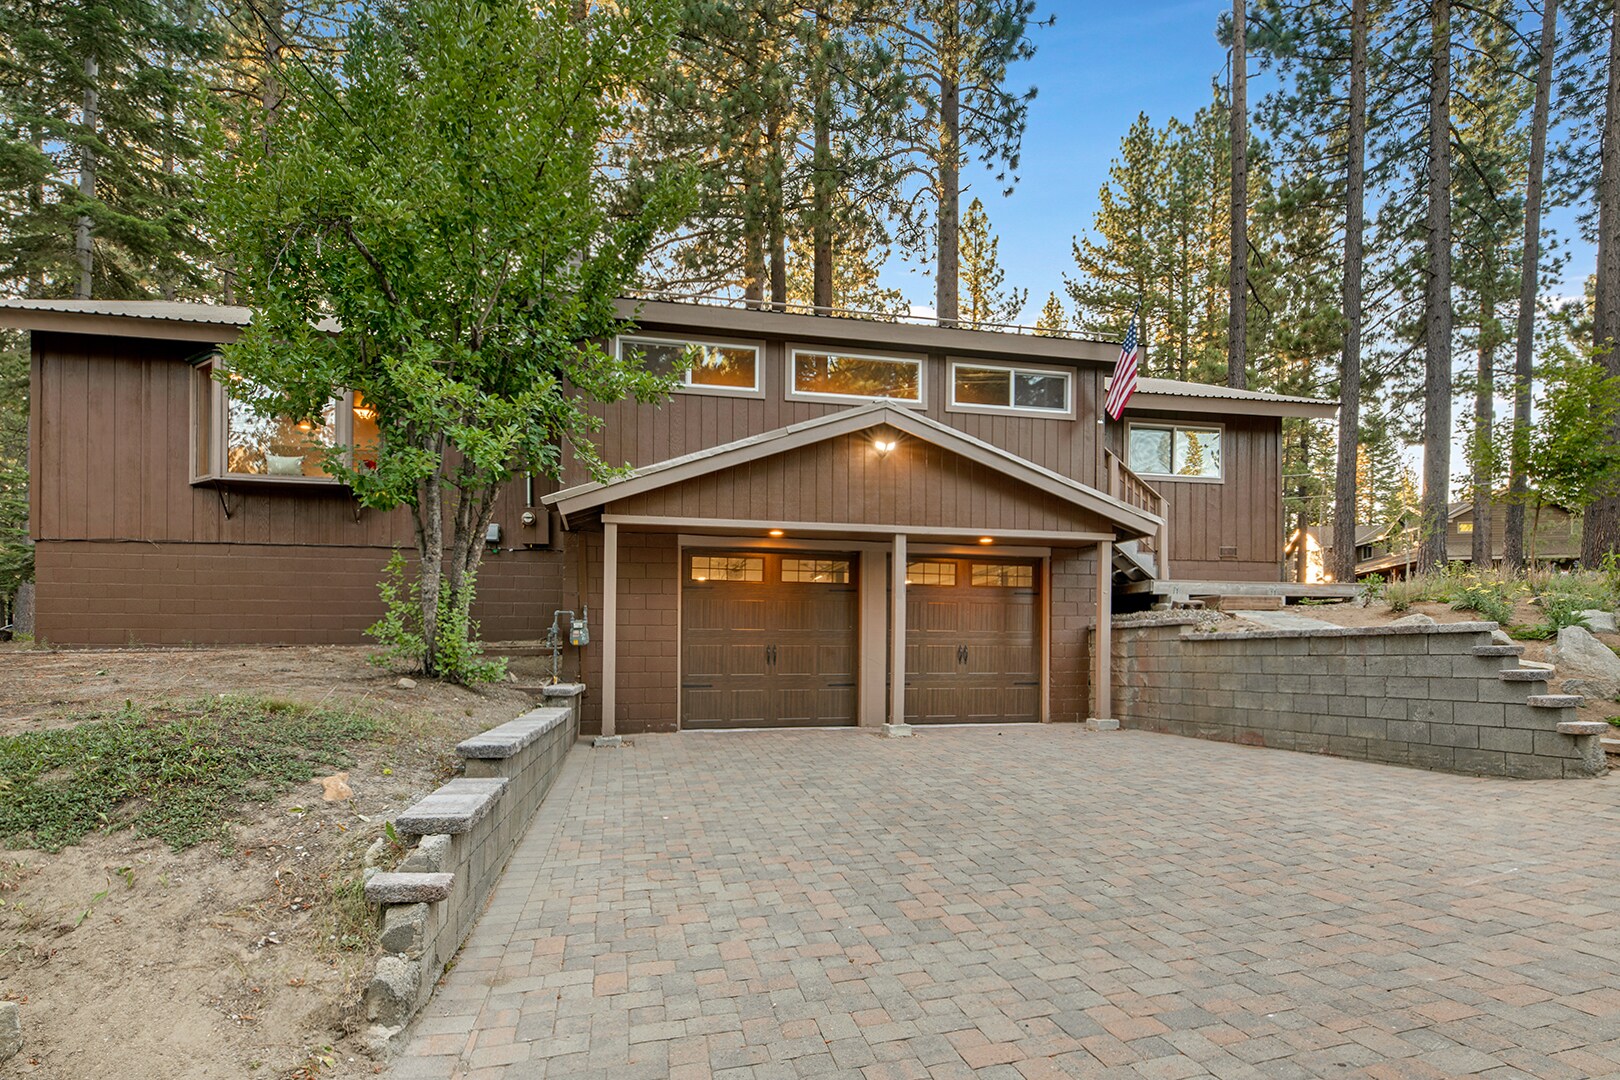 Welcome to South Lake Tahoe! This home is professionally managed by TurnKey Vacation Rentals.